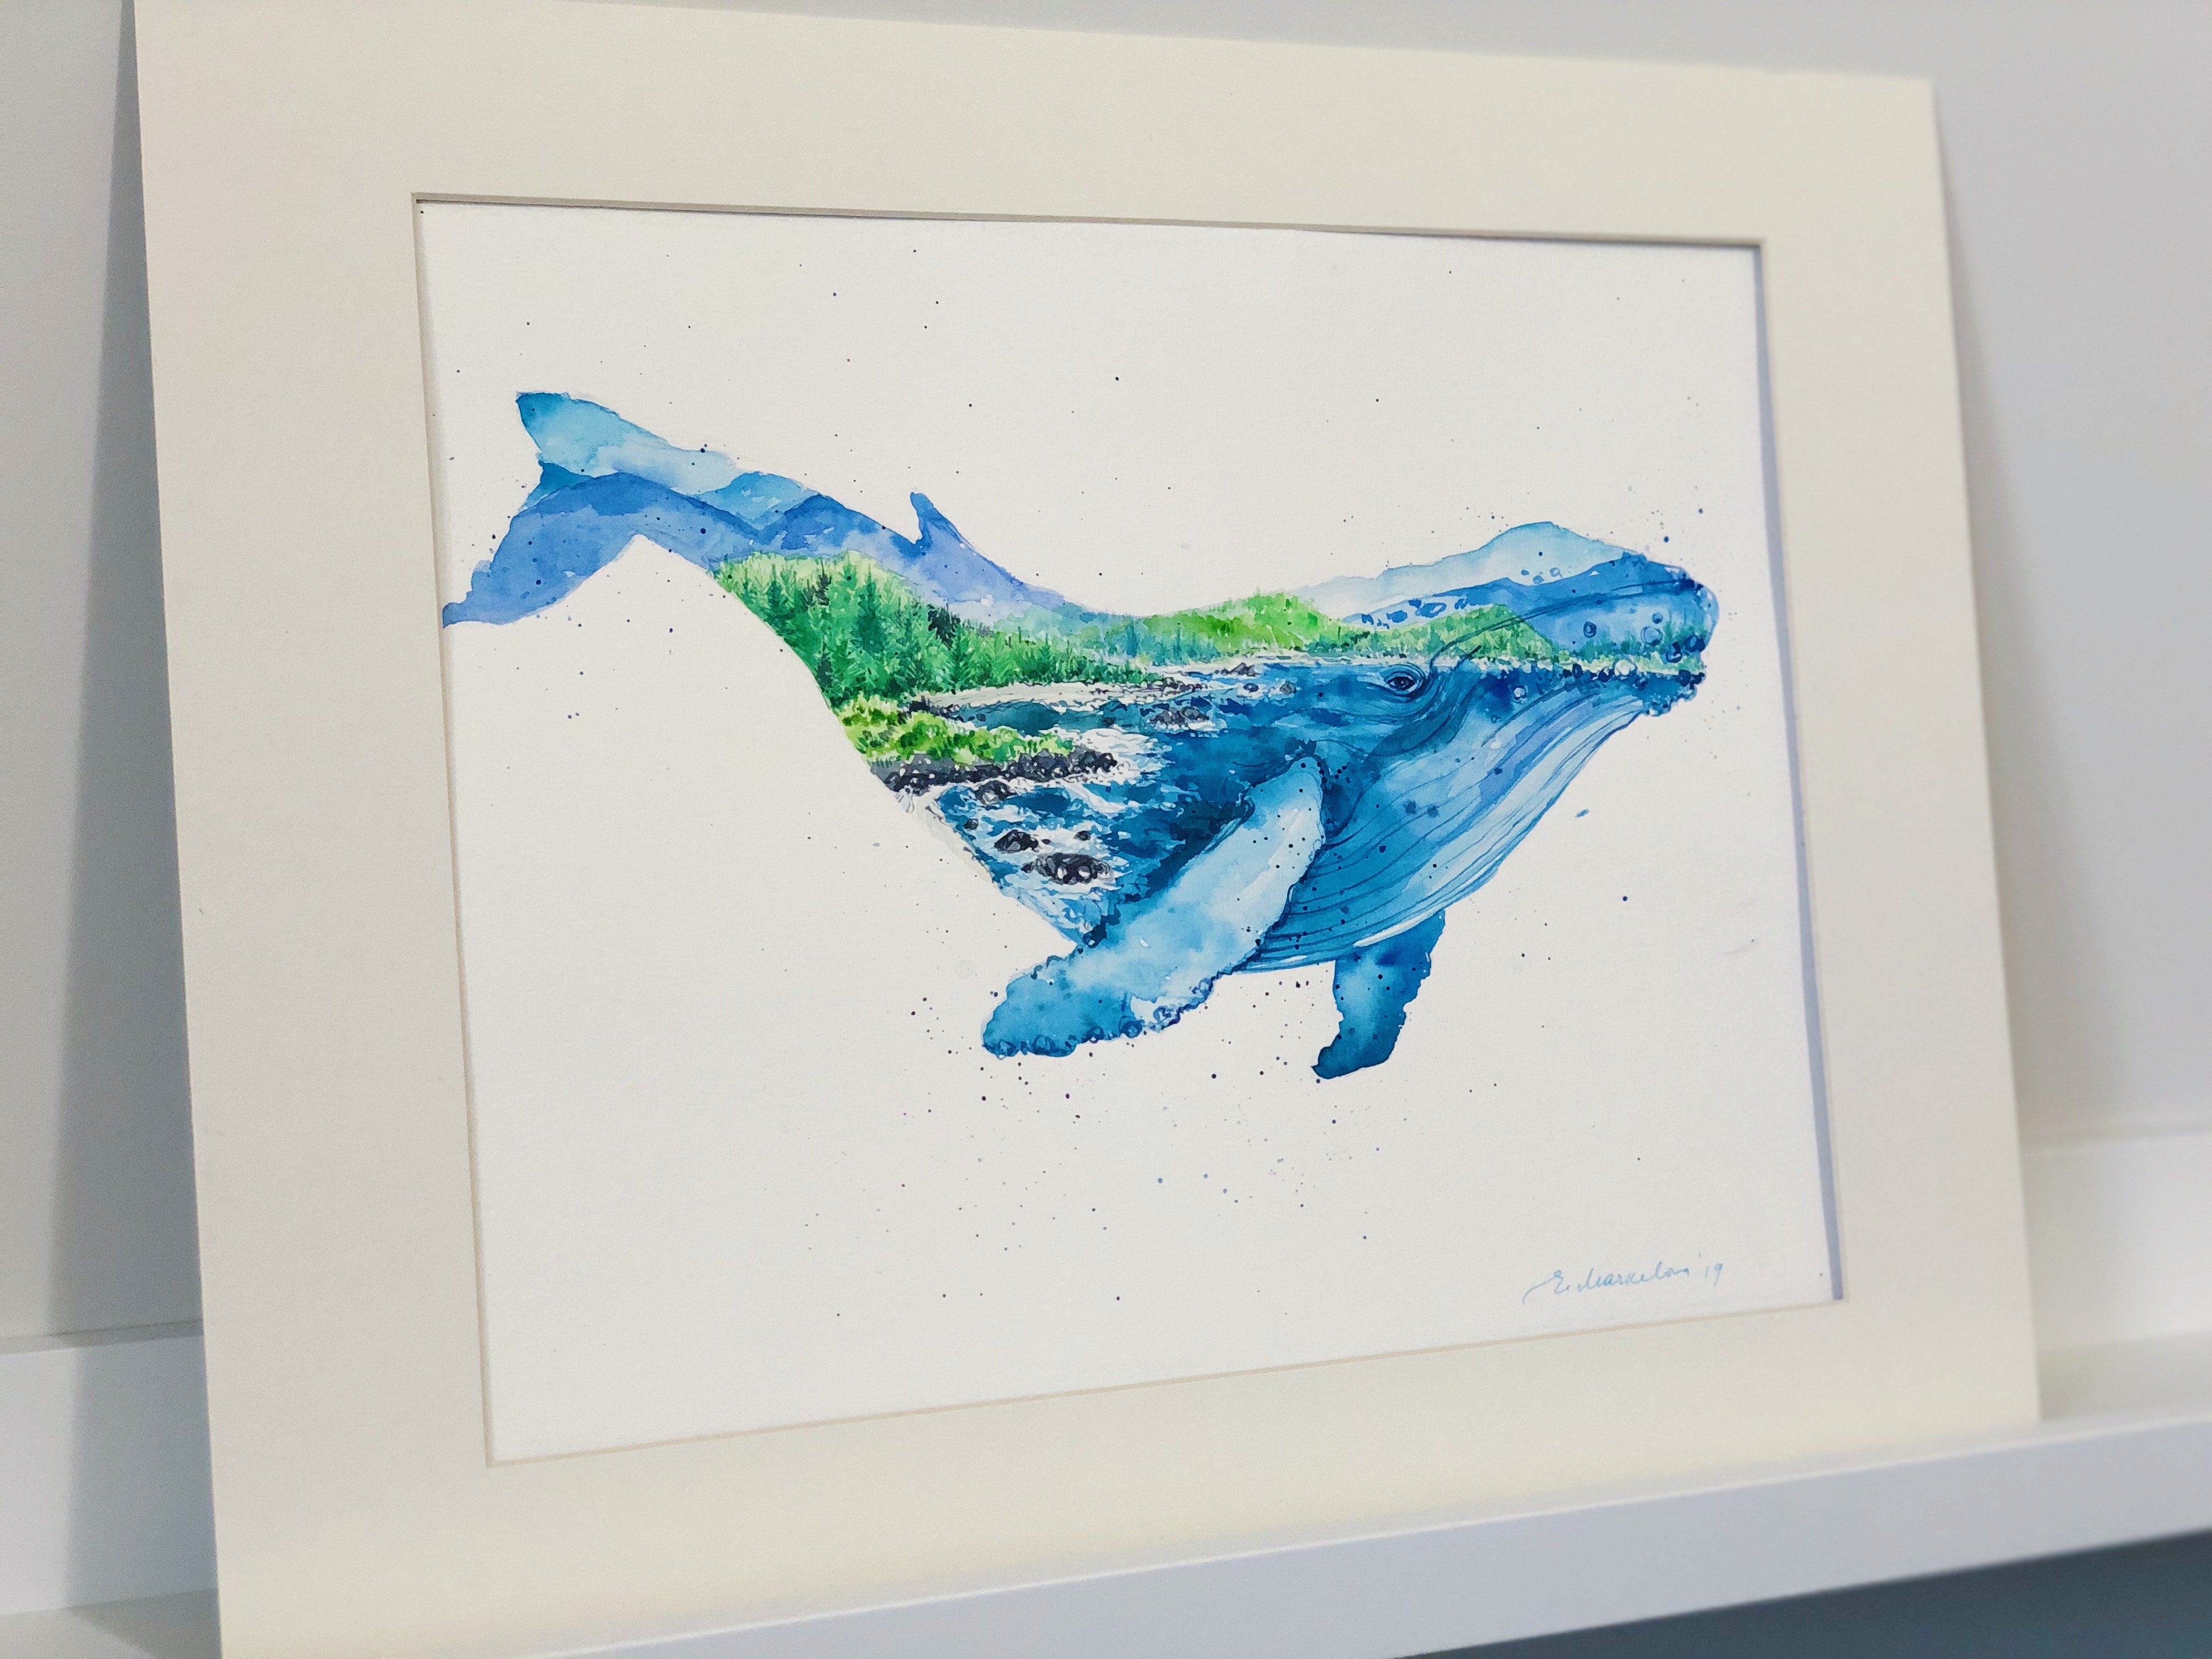 "Humphrey the Humpback" Whale Double Exposure Original Watercolour Painting 11x15